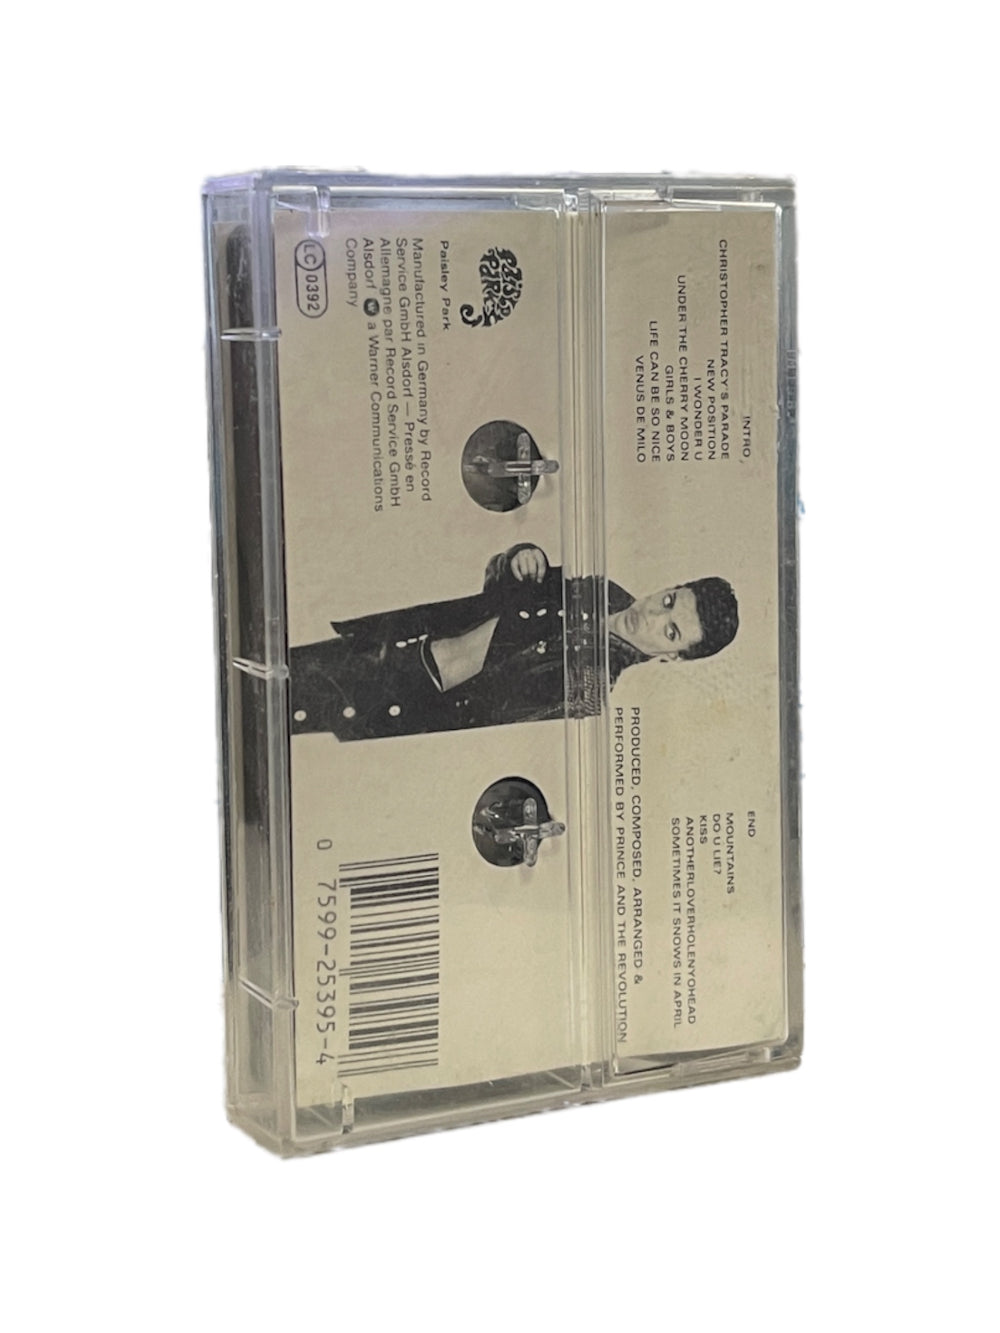 Prince – & The Revolution - Parade Music From The Motion Picture Under The Cherry Moon Cassette Album EU Preloved:1986